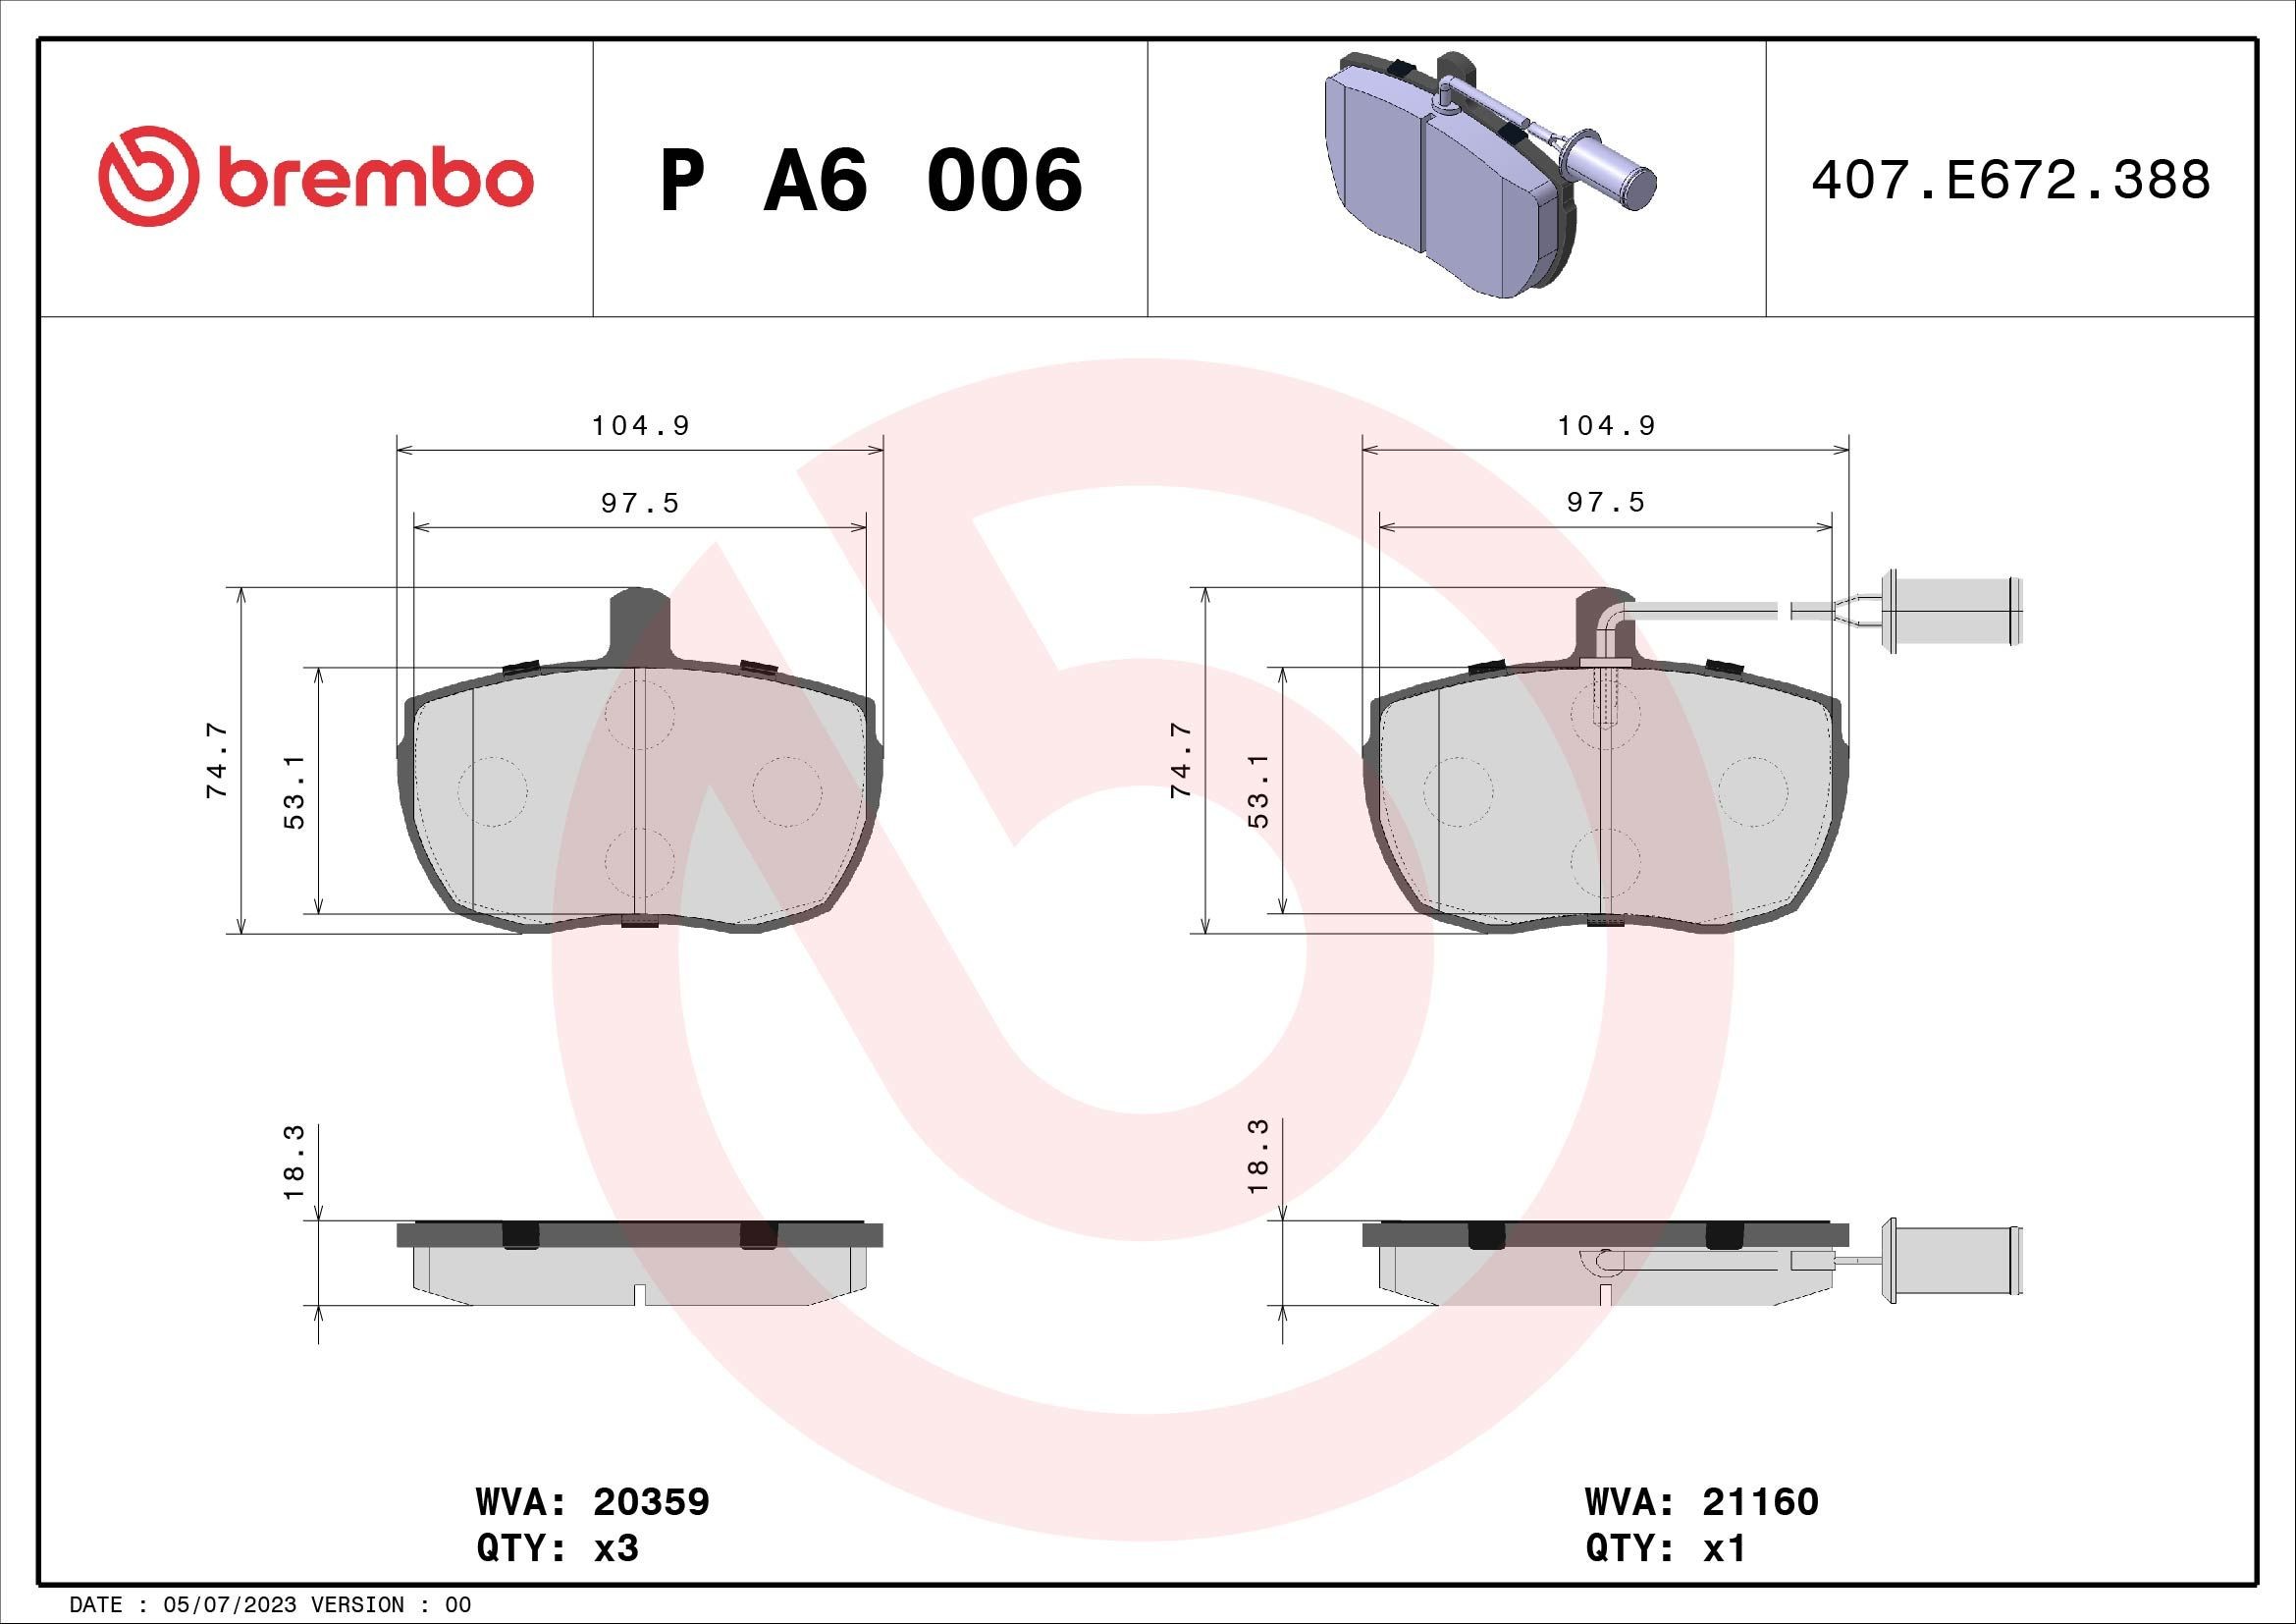 Great value for money - BREMBO Brake pad set P A6 006